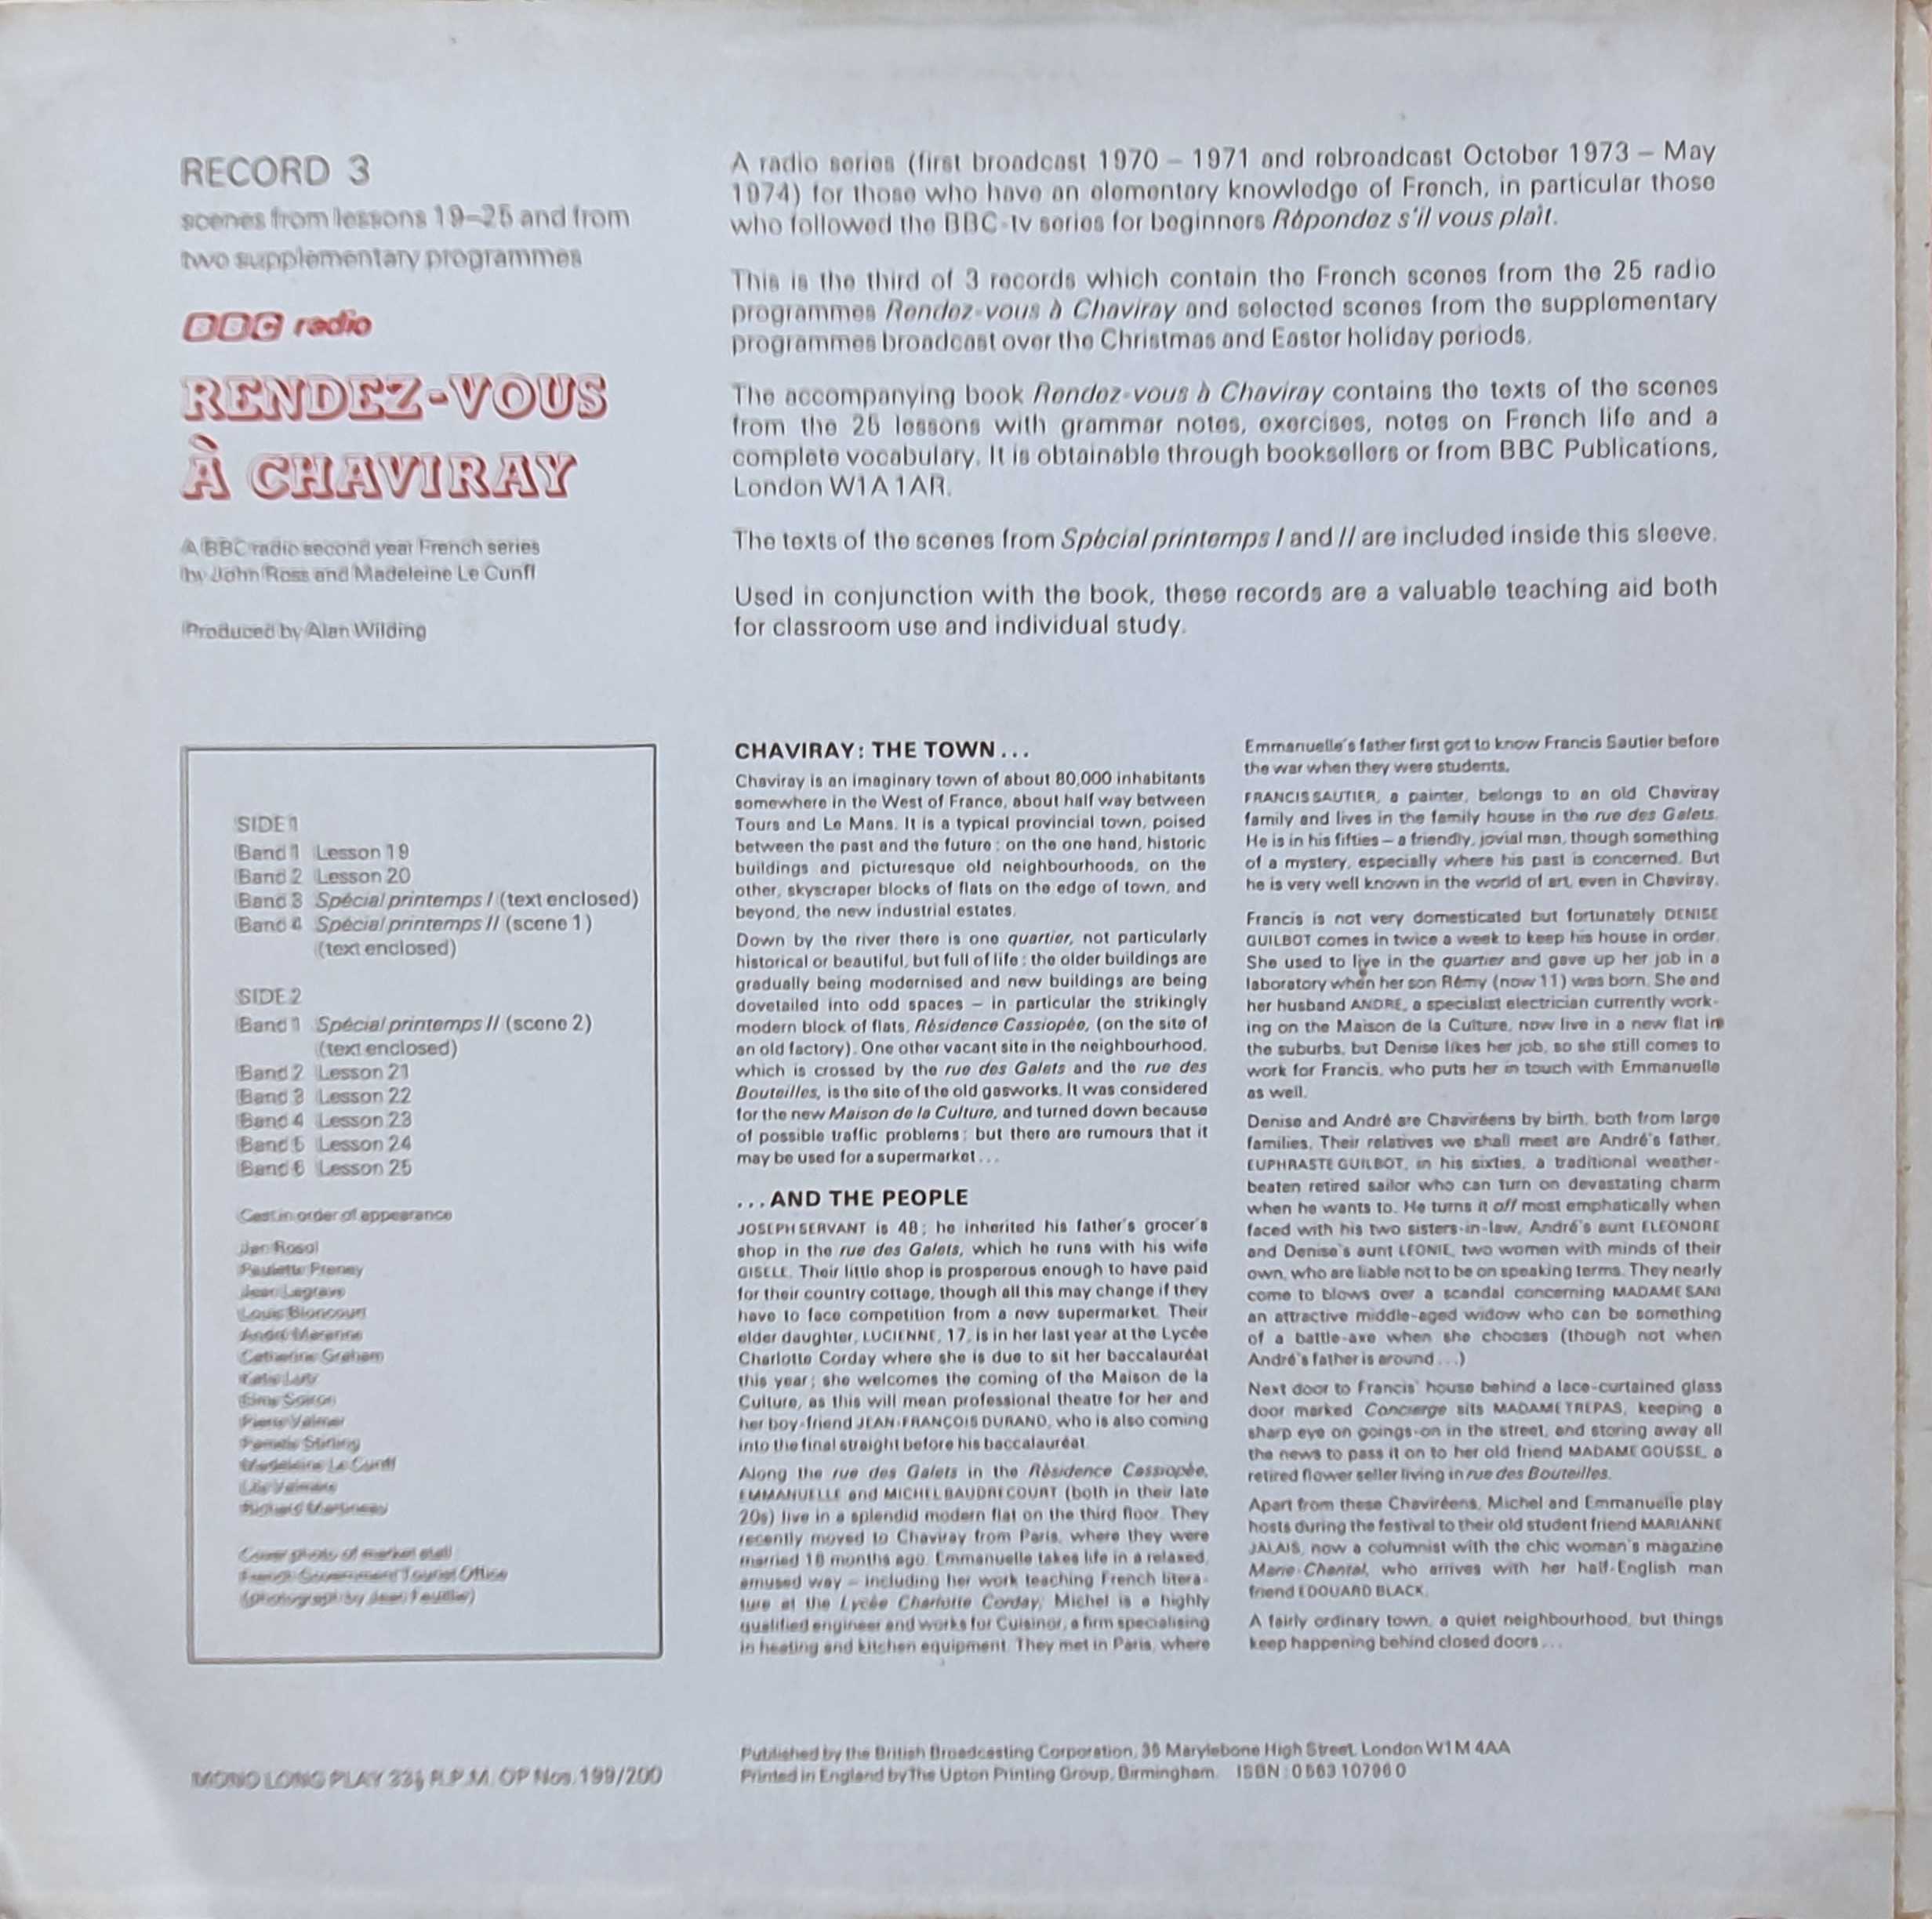 Picture of OP 199/200 Rendez-vous a Chaviray - BBC radio Second Year French - Record 3 - Lessons 19 - 25 by artist John Ross / Madeleine Le Cunff from the BBC records and Tapes library